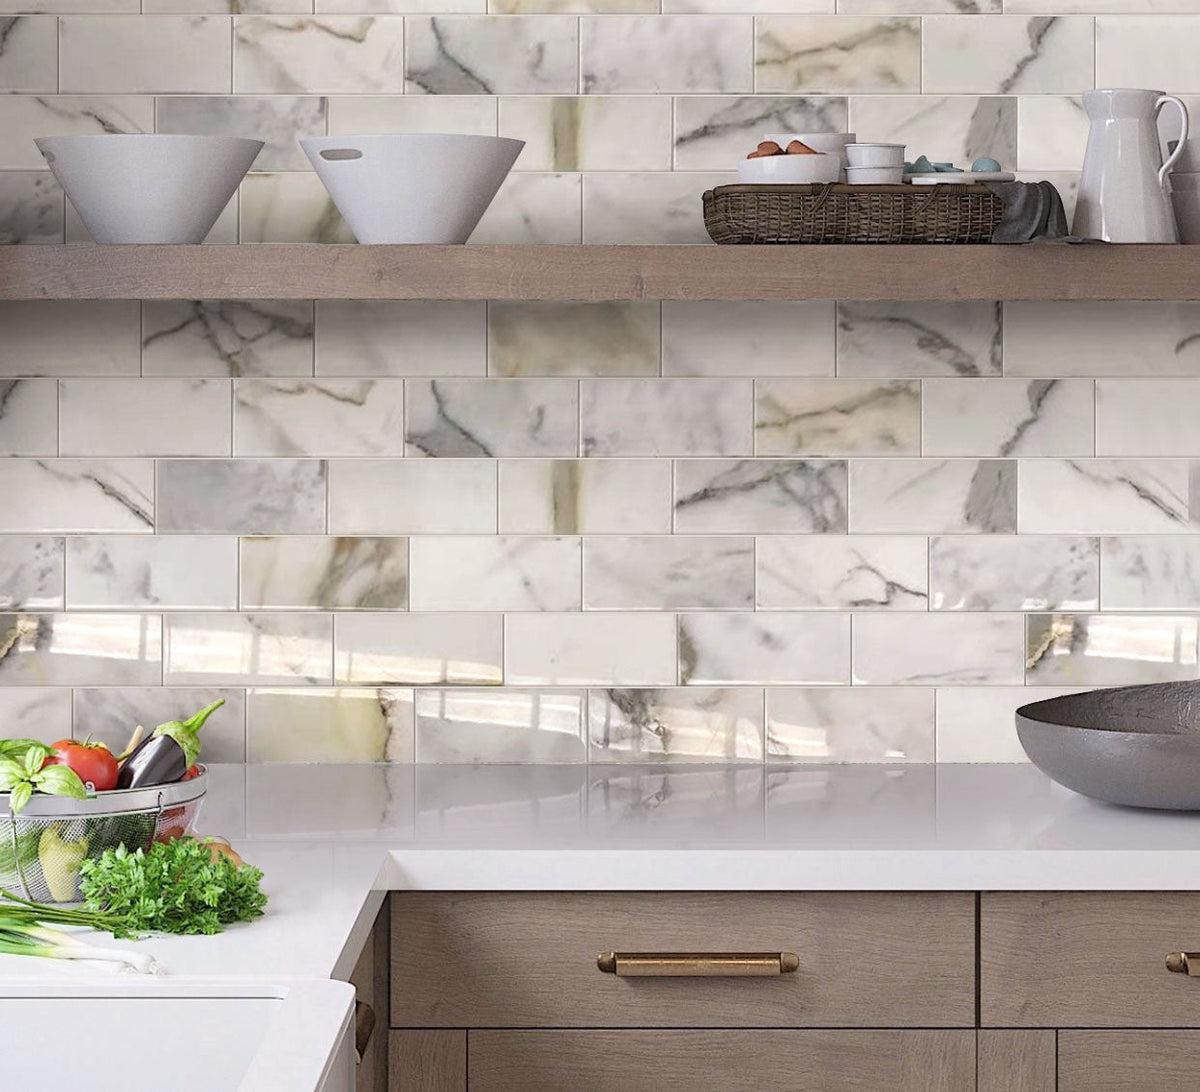 Neutral Kitchen Design with Calacatta marble subway tiles and open shelves